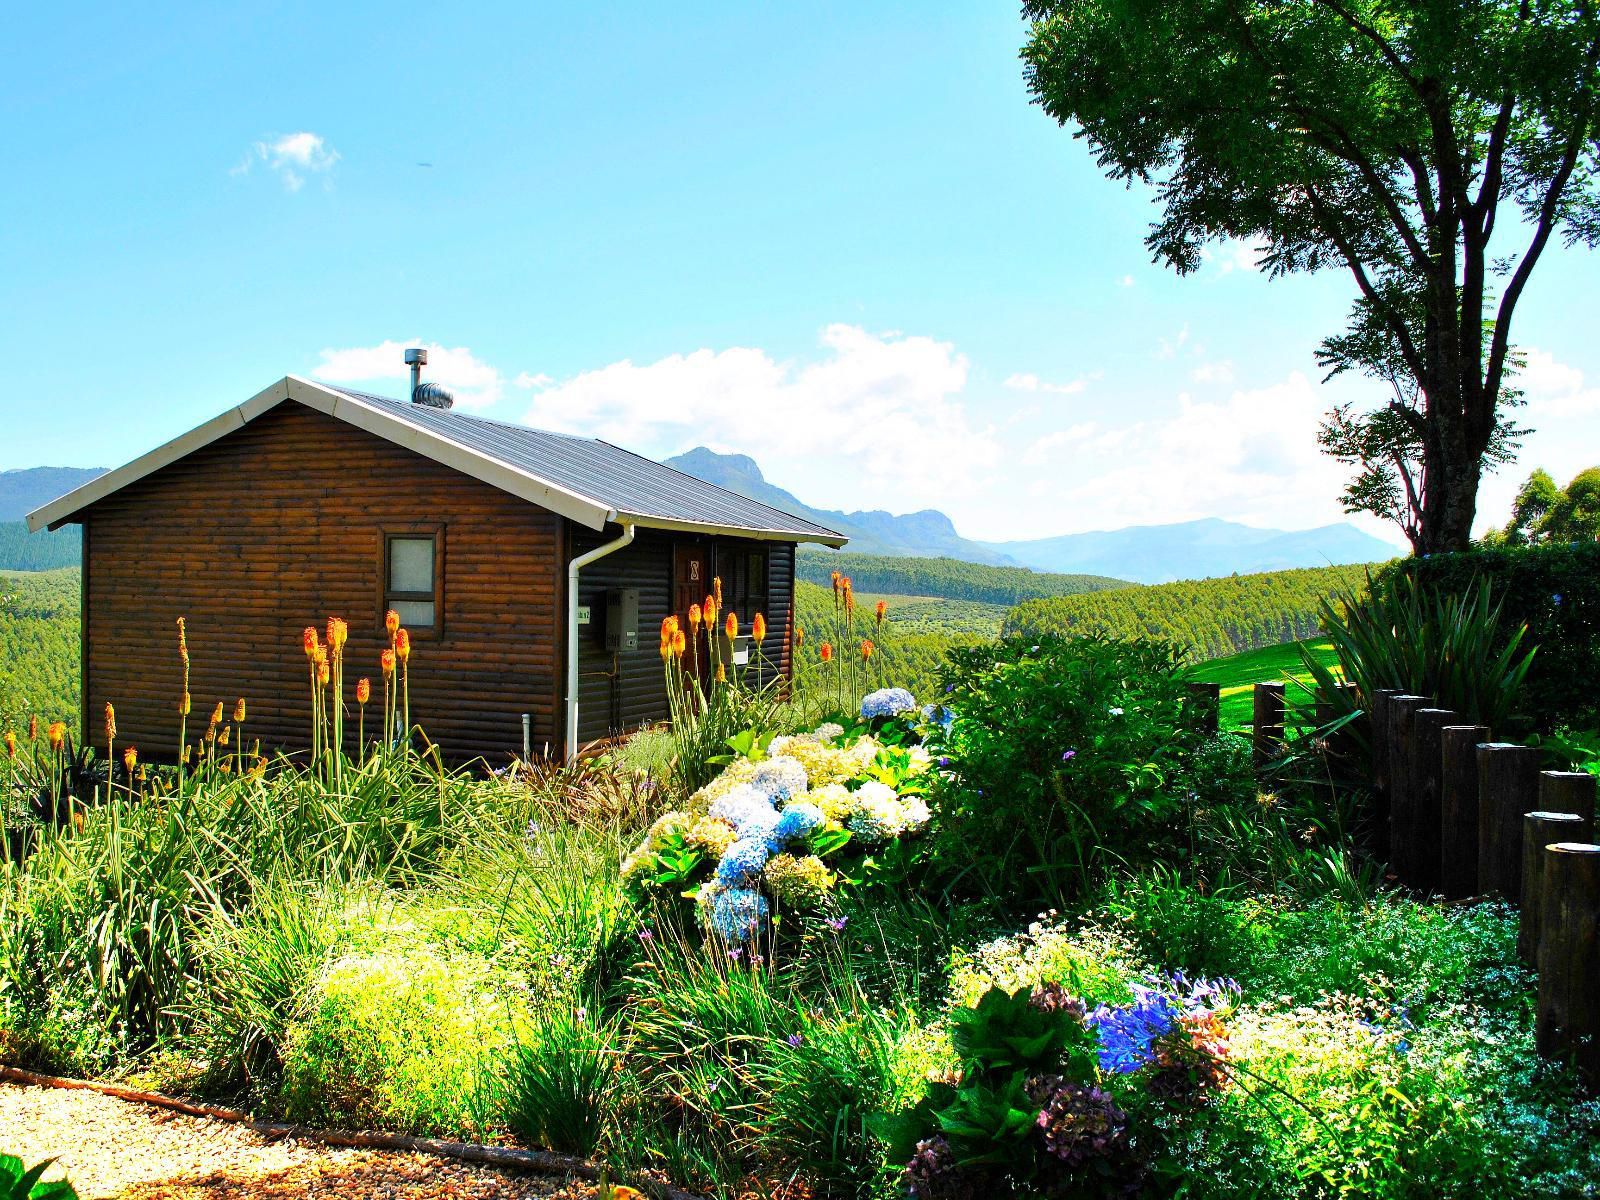 Forest View Cabins Tzaneen Limpopo Province South Africa Complementary Colors, Cabin, Building, Architecture